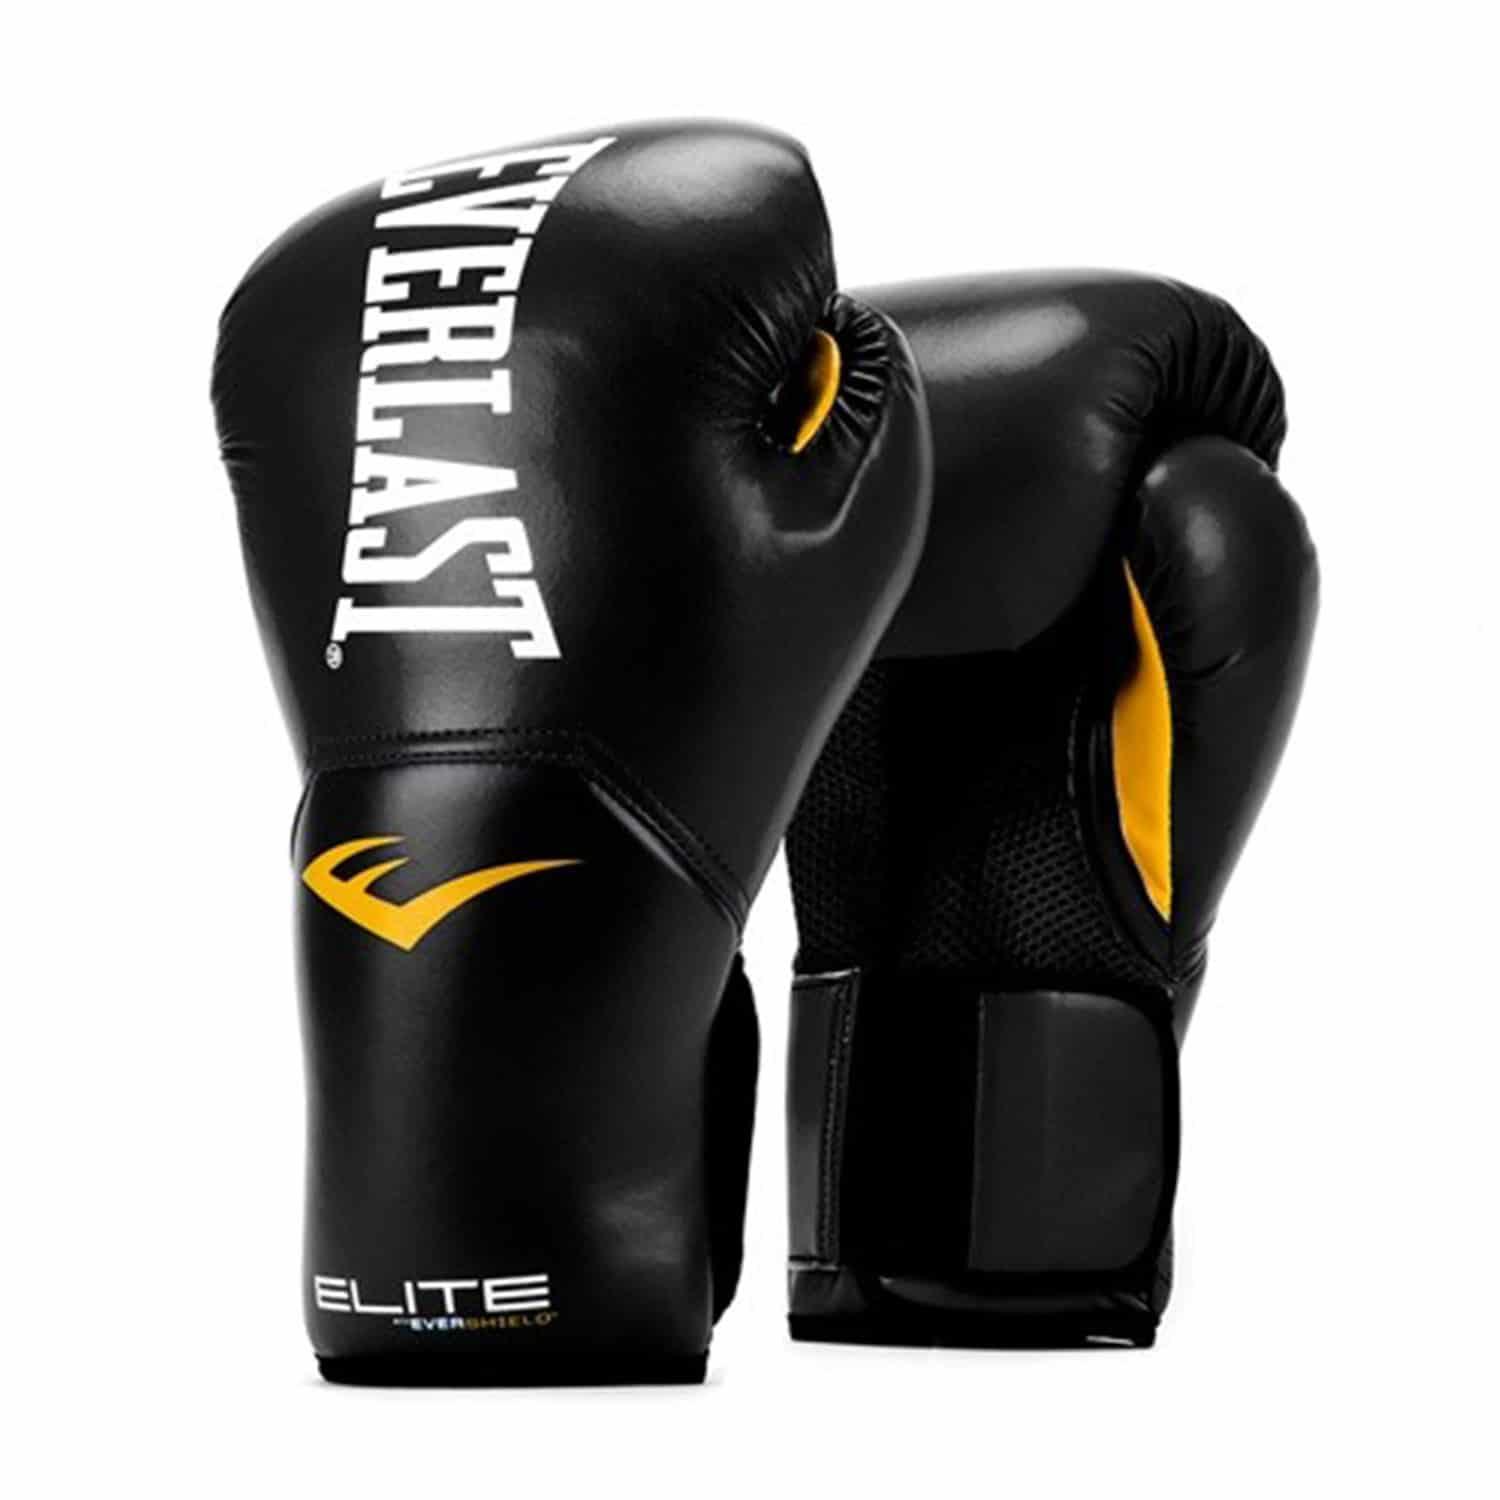 Everlast MMA Pro Style Grappling Boxing Gloves, Small and Medium, Black